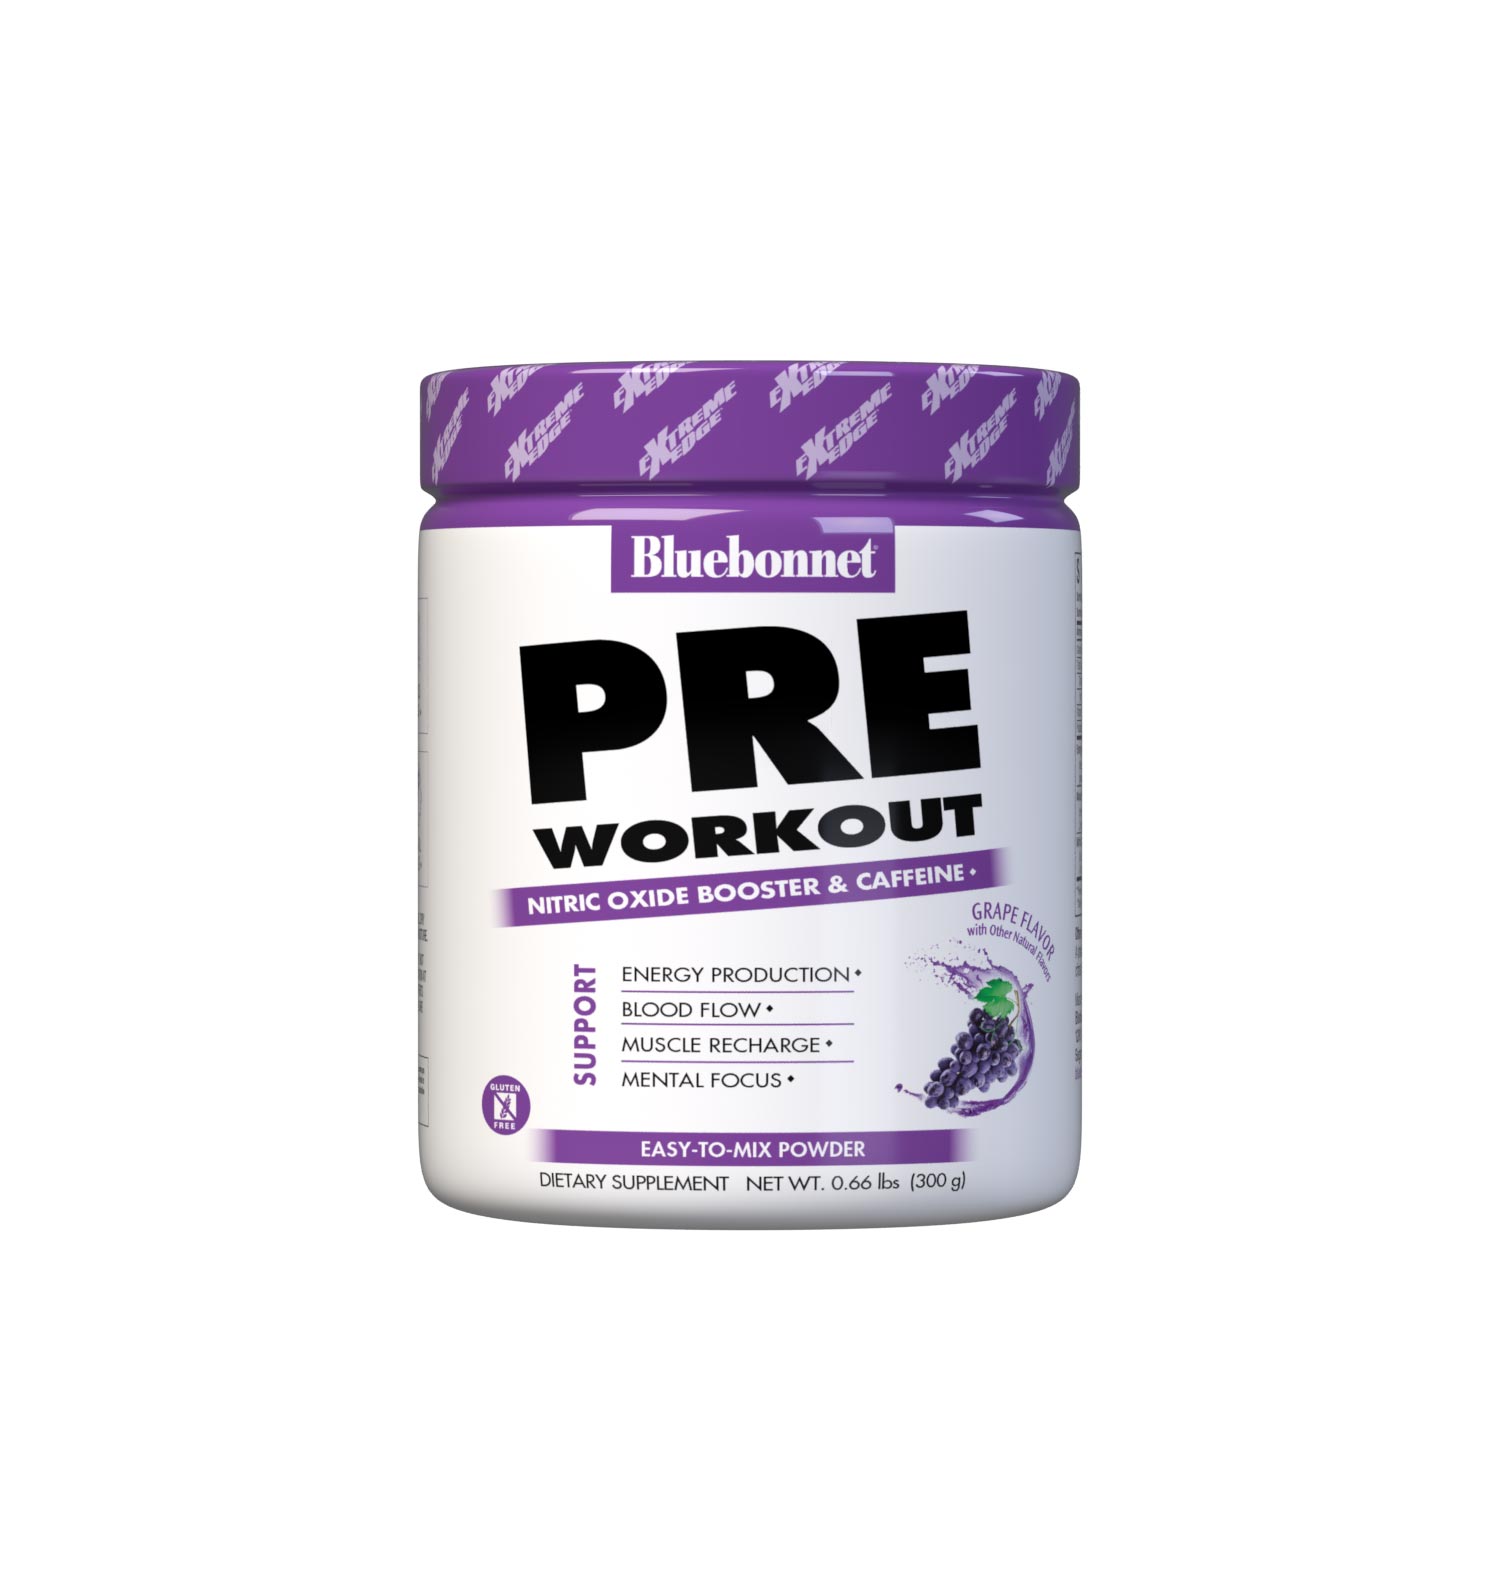 Bluebonnet's Grape Flavored Pre Workout powder is designed to be one of the most comprehensive, muscle recharging formulas ever created. This triple-turbo, super-charged formula generates high energy, sharpens mental concentration, and increases nitric oxide (NO) levels for greater blood flow and intense muscle pumps. #size_0.66 lb